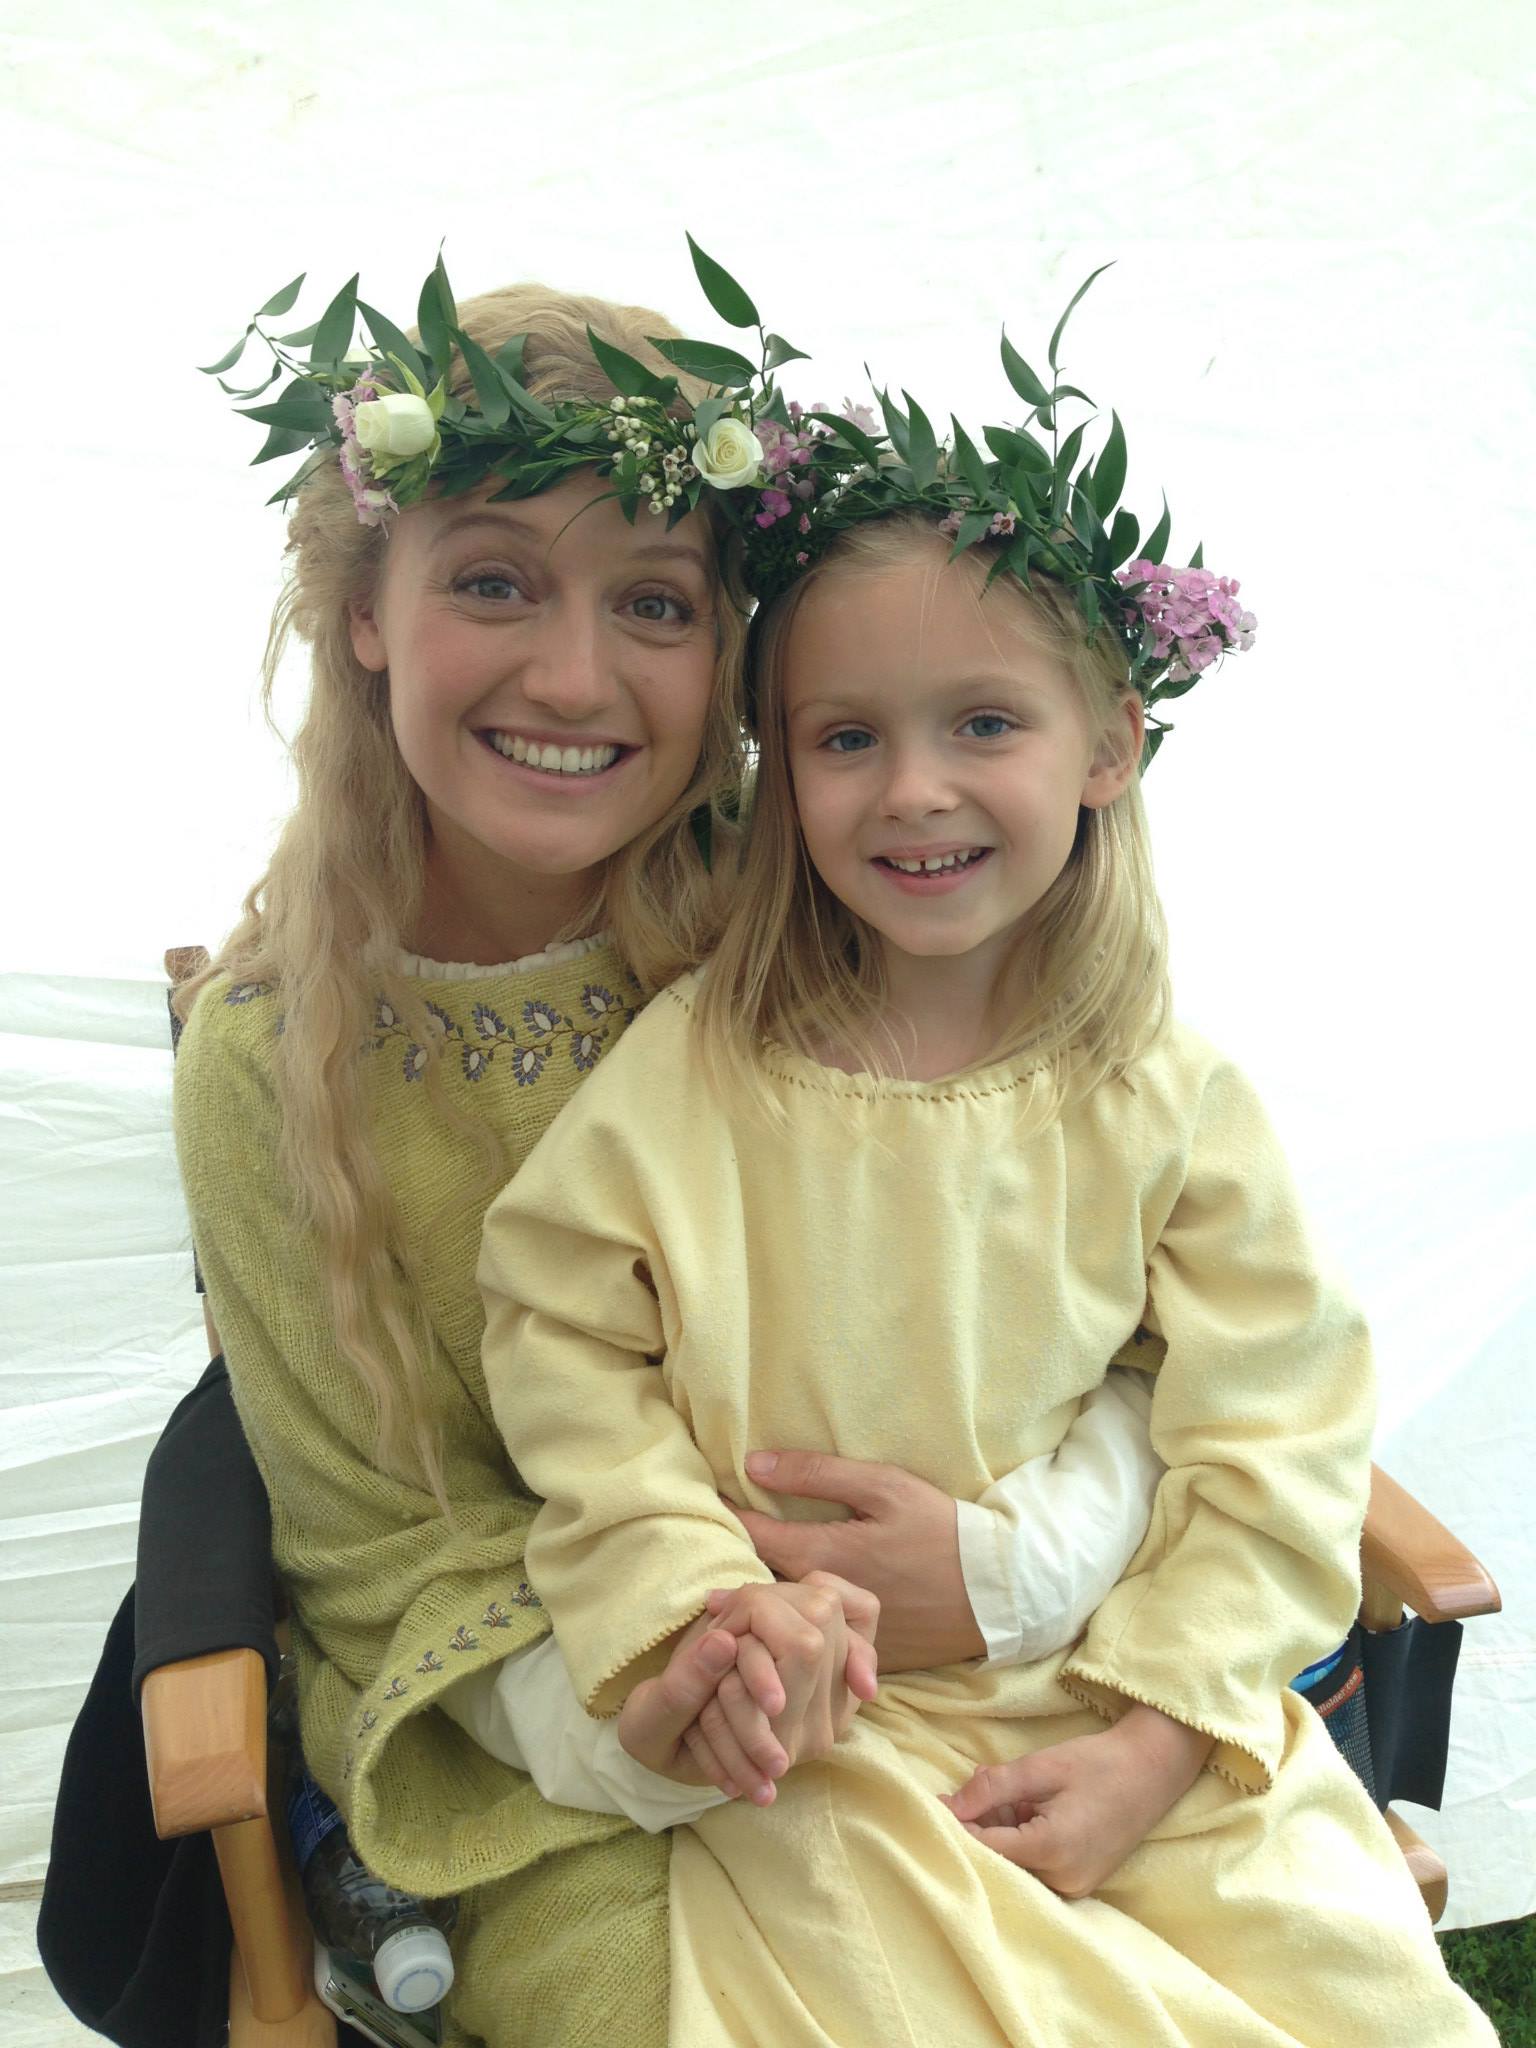 'Child Esther' and 'Young Esther' Hayley McCarthey